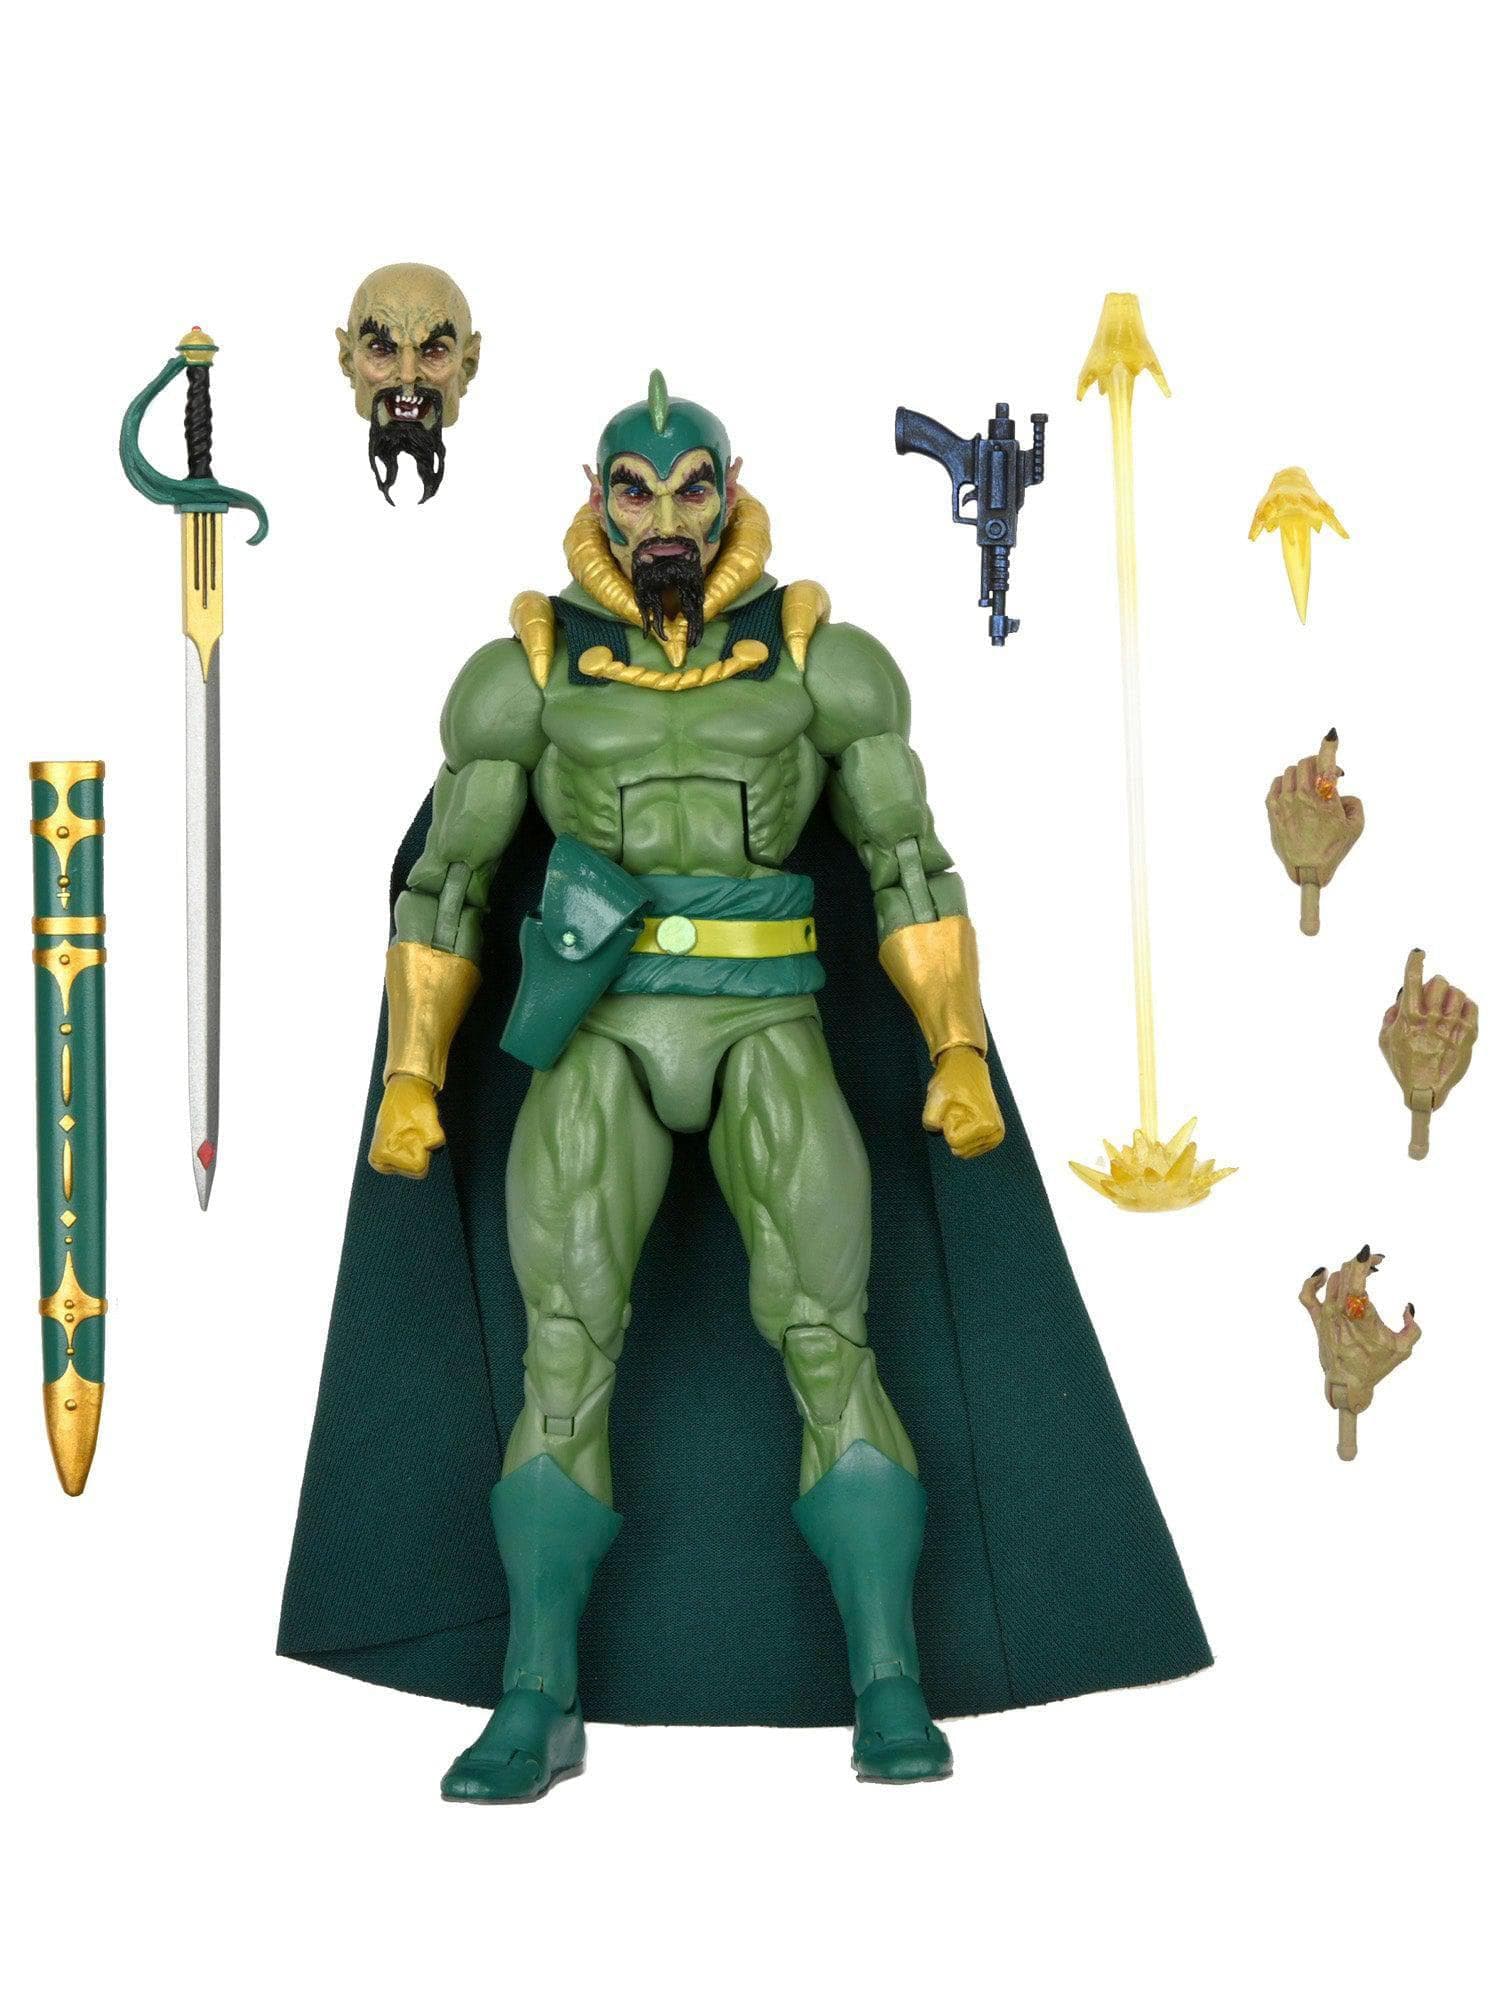 NECA - King Features - 7" Scale Action Figure - Original Superheroes Series Ming the Merciless - costumes.com